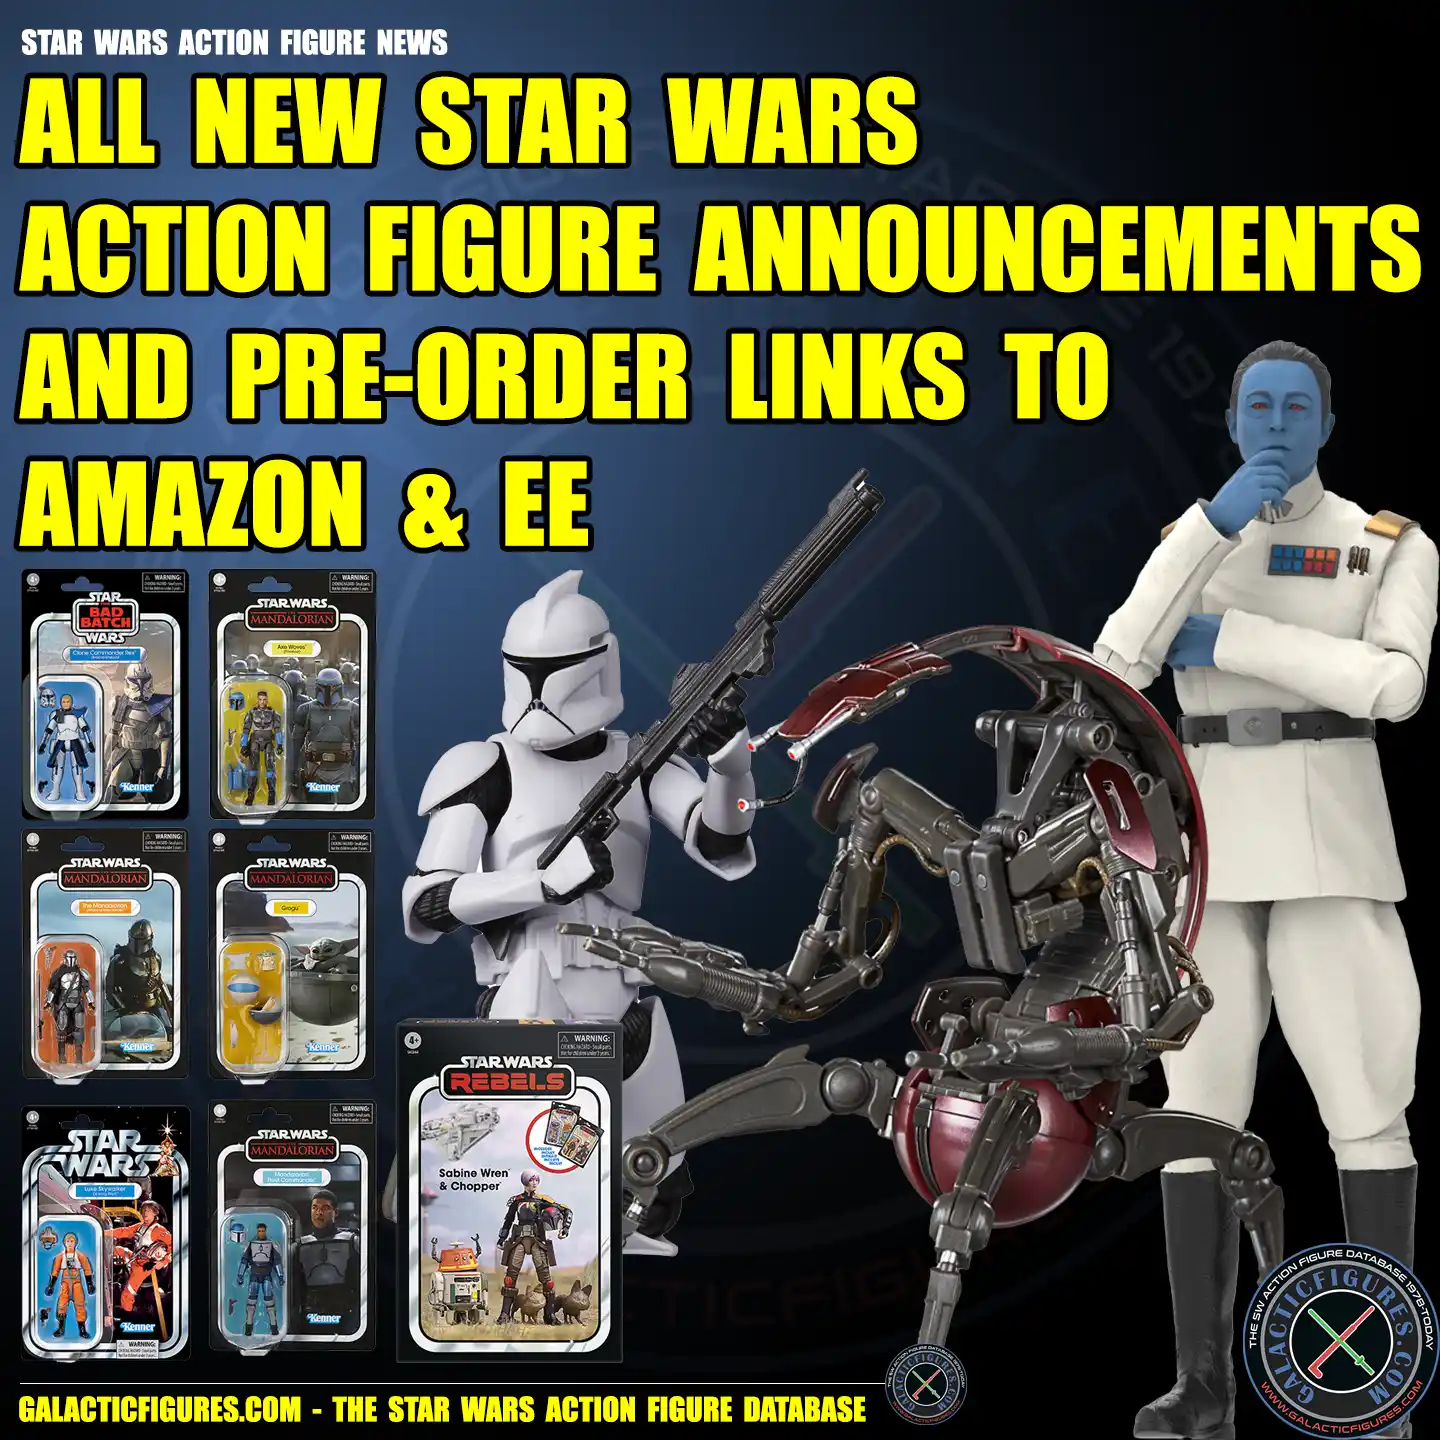 All New Star Wars Action Figure Announcements